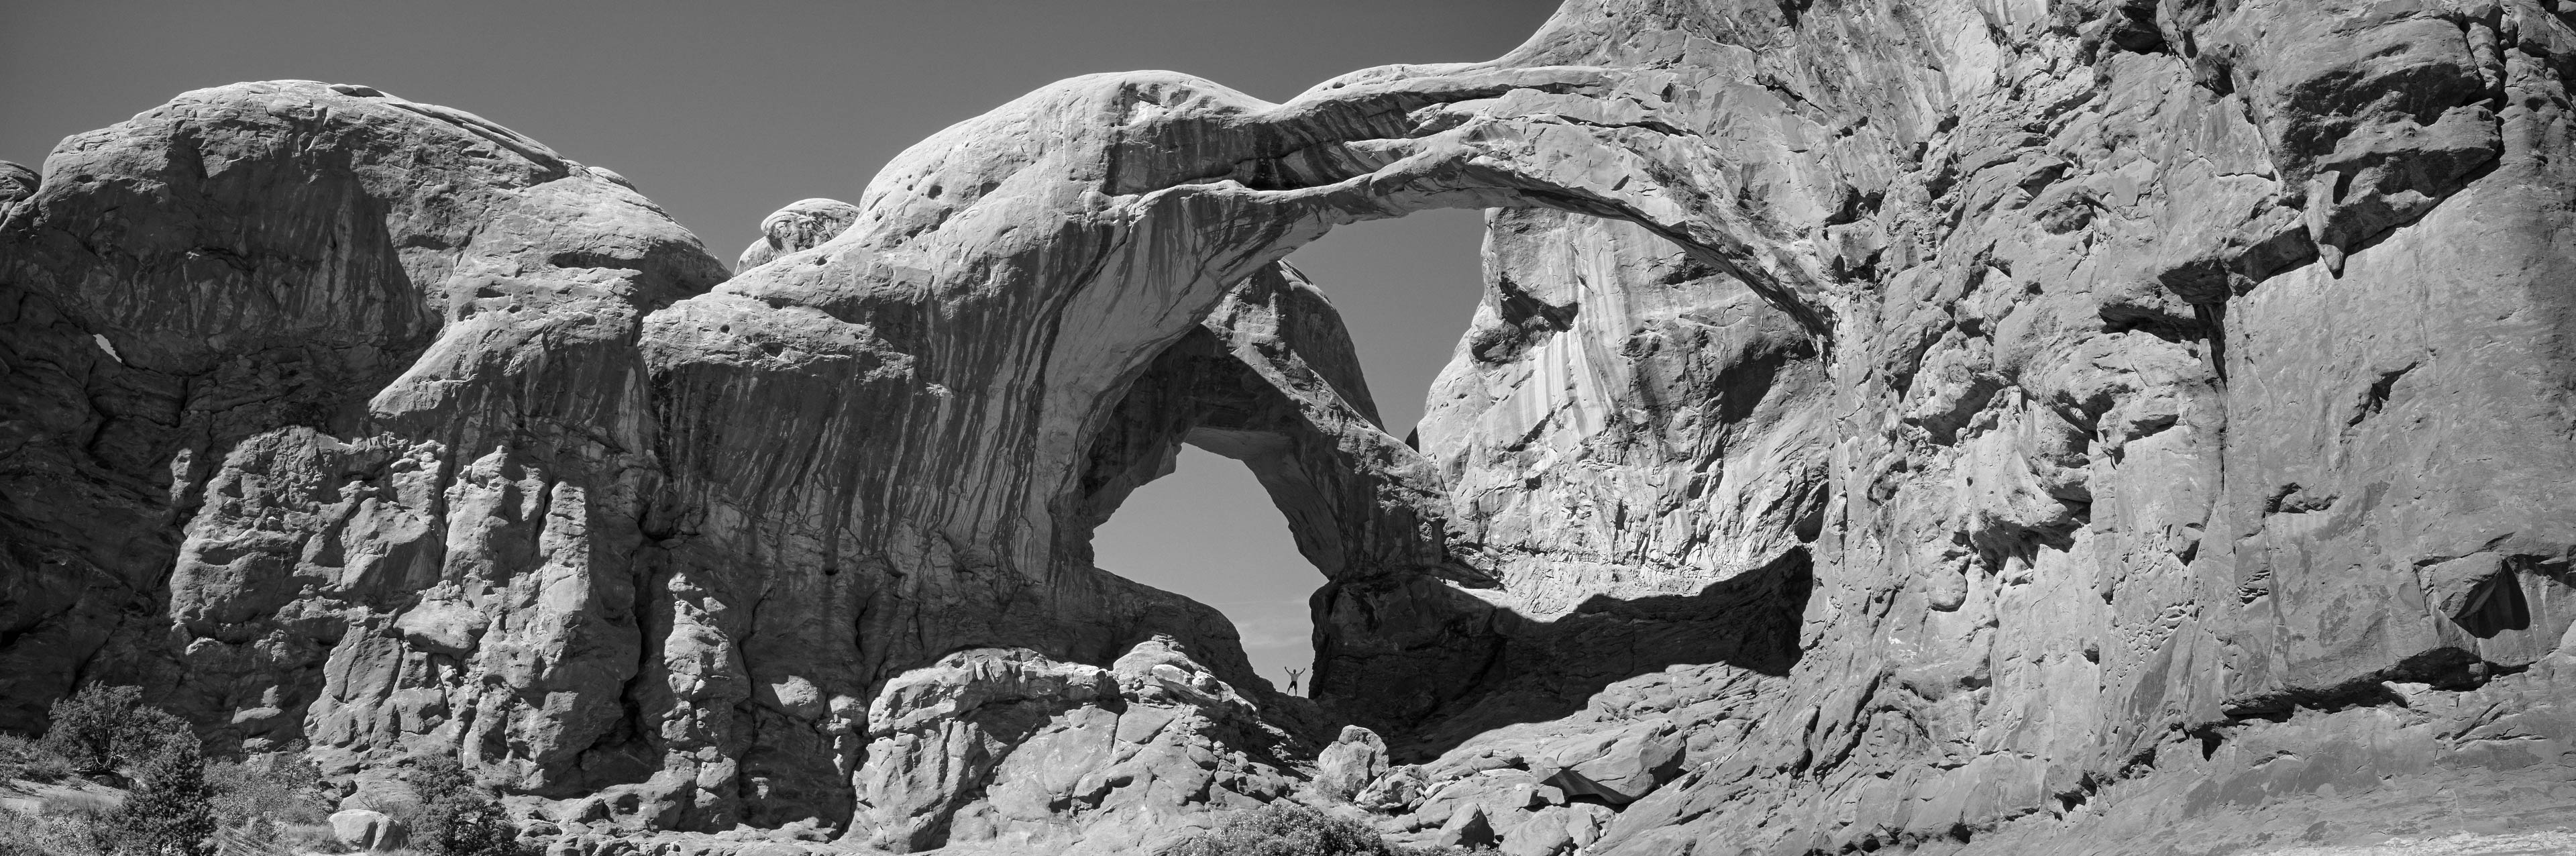 Double Arch, Arches National Park, Utah, USA (28042_BW1)